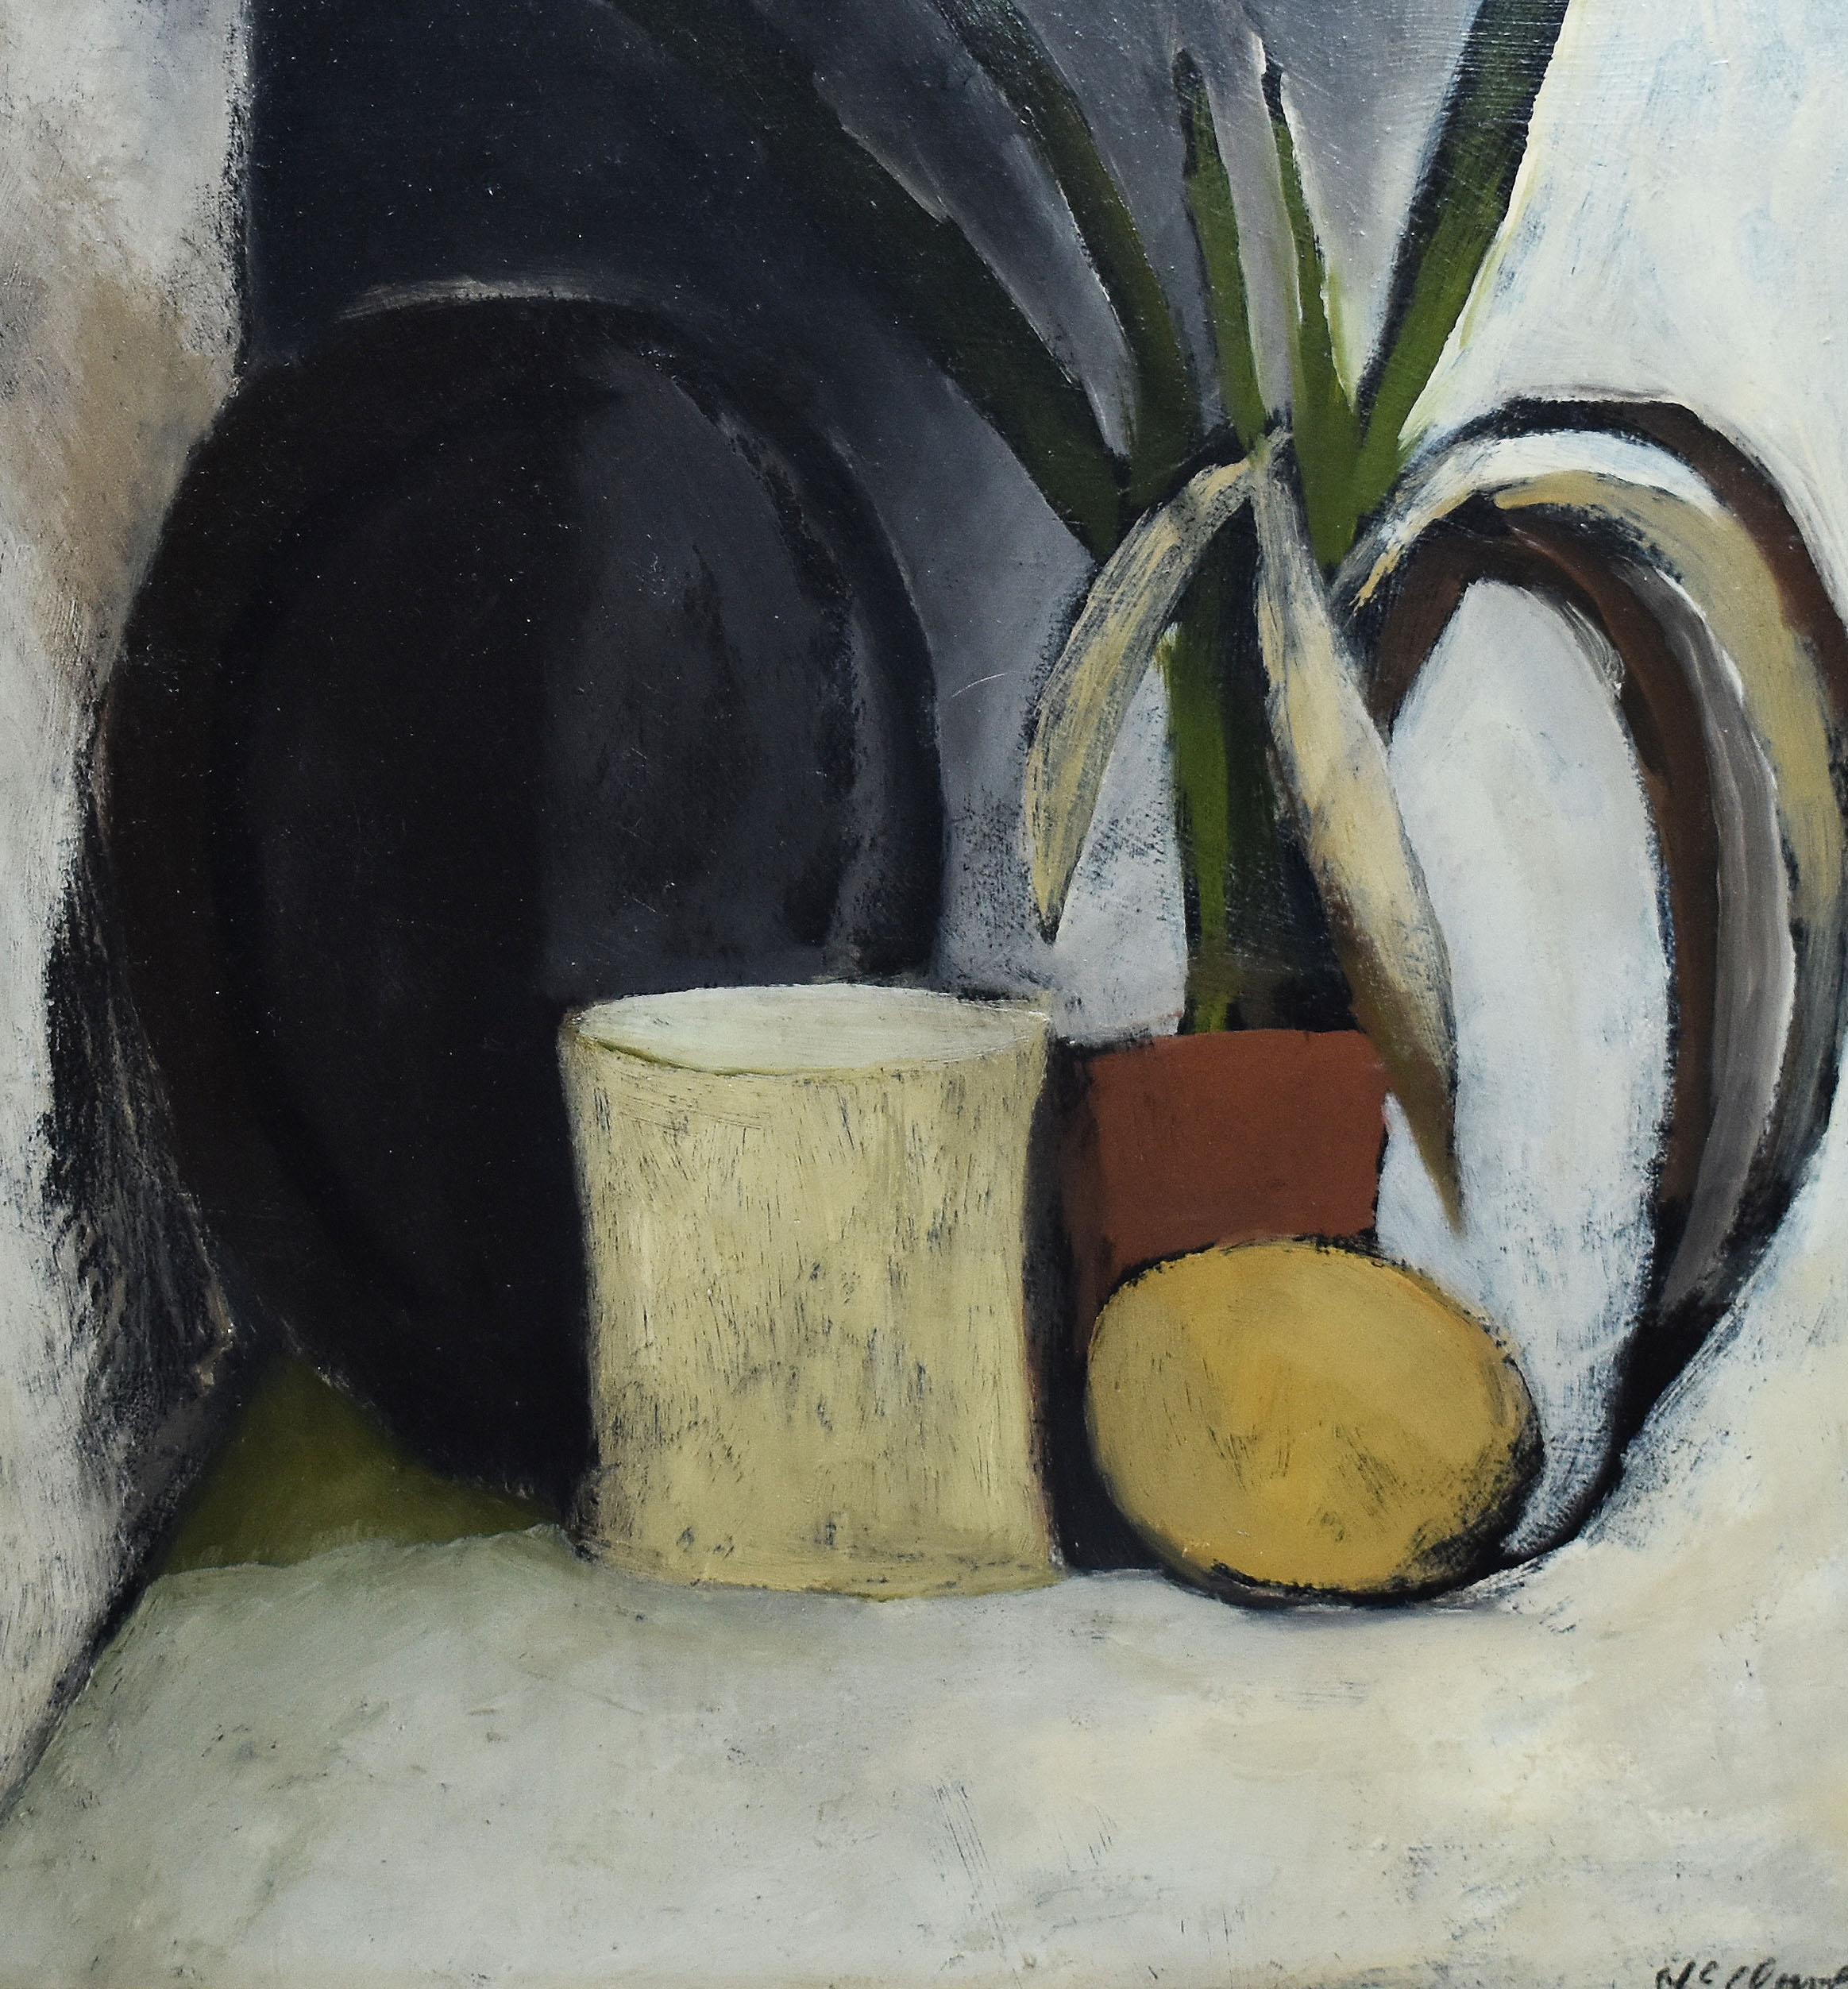 Antique Scottish modernist still life painting by David McClure (1926 - 1998). Oil on board, circa 1957. Signed. Displayed in a period modernist frame. Image size, 11